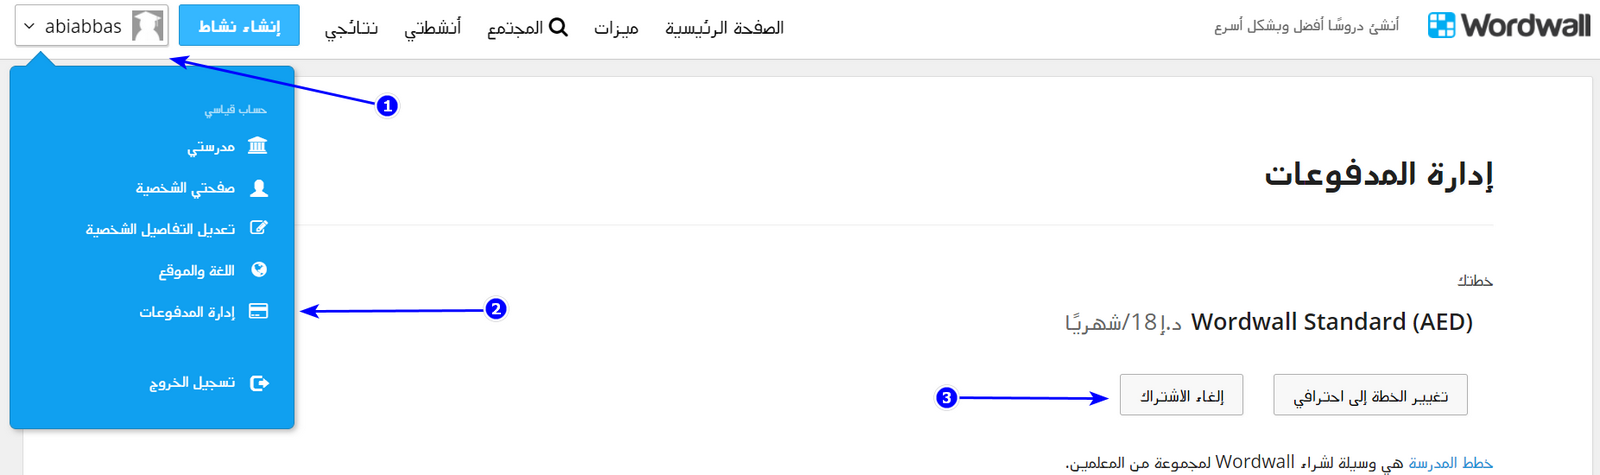 How_to_change_from_monthly_to_annual_payment_-_Arabic_-_1.png